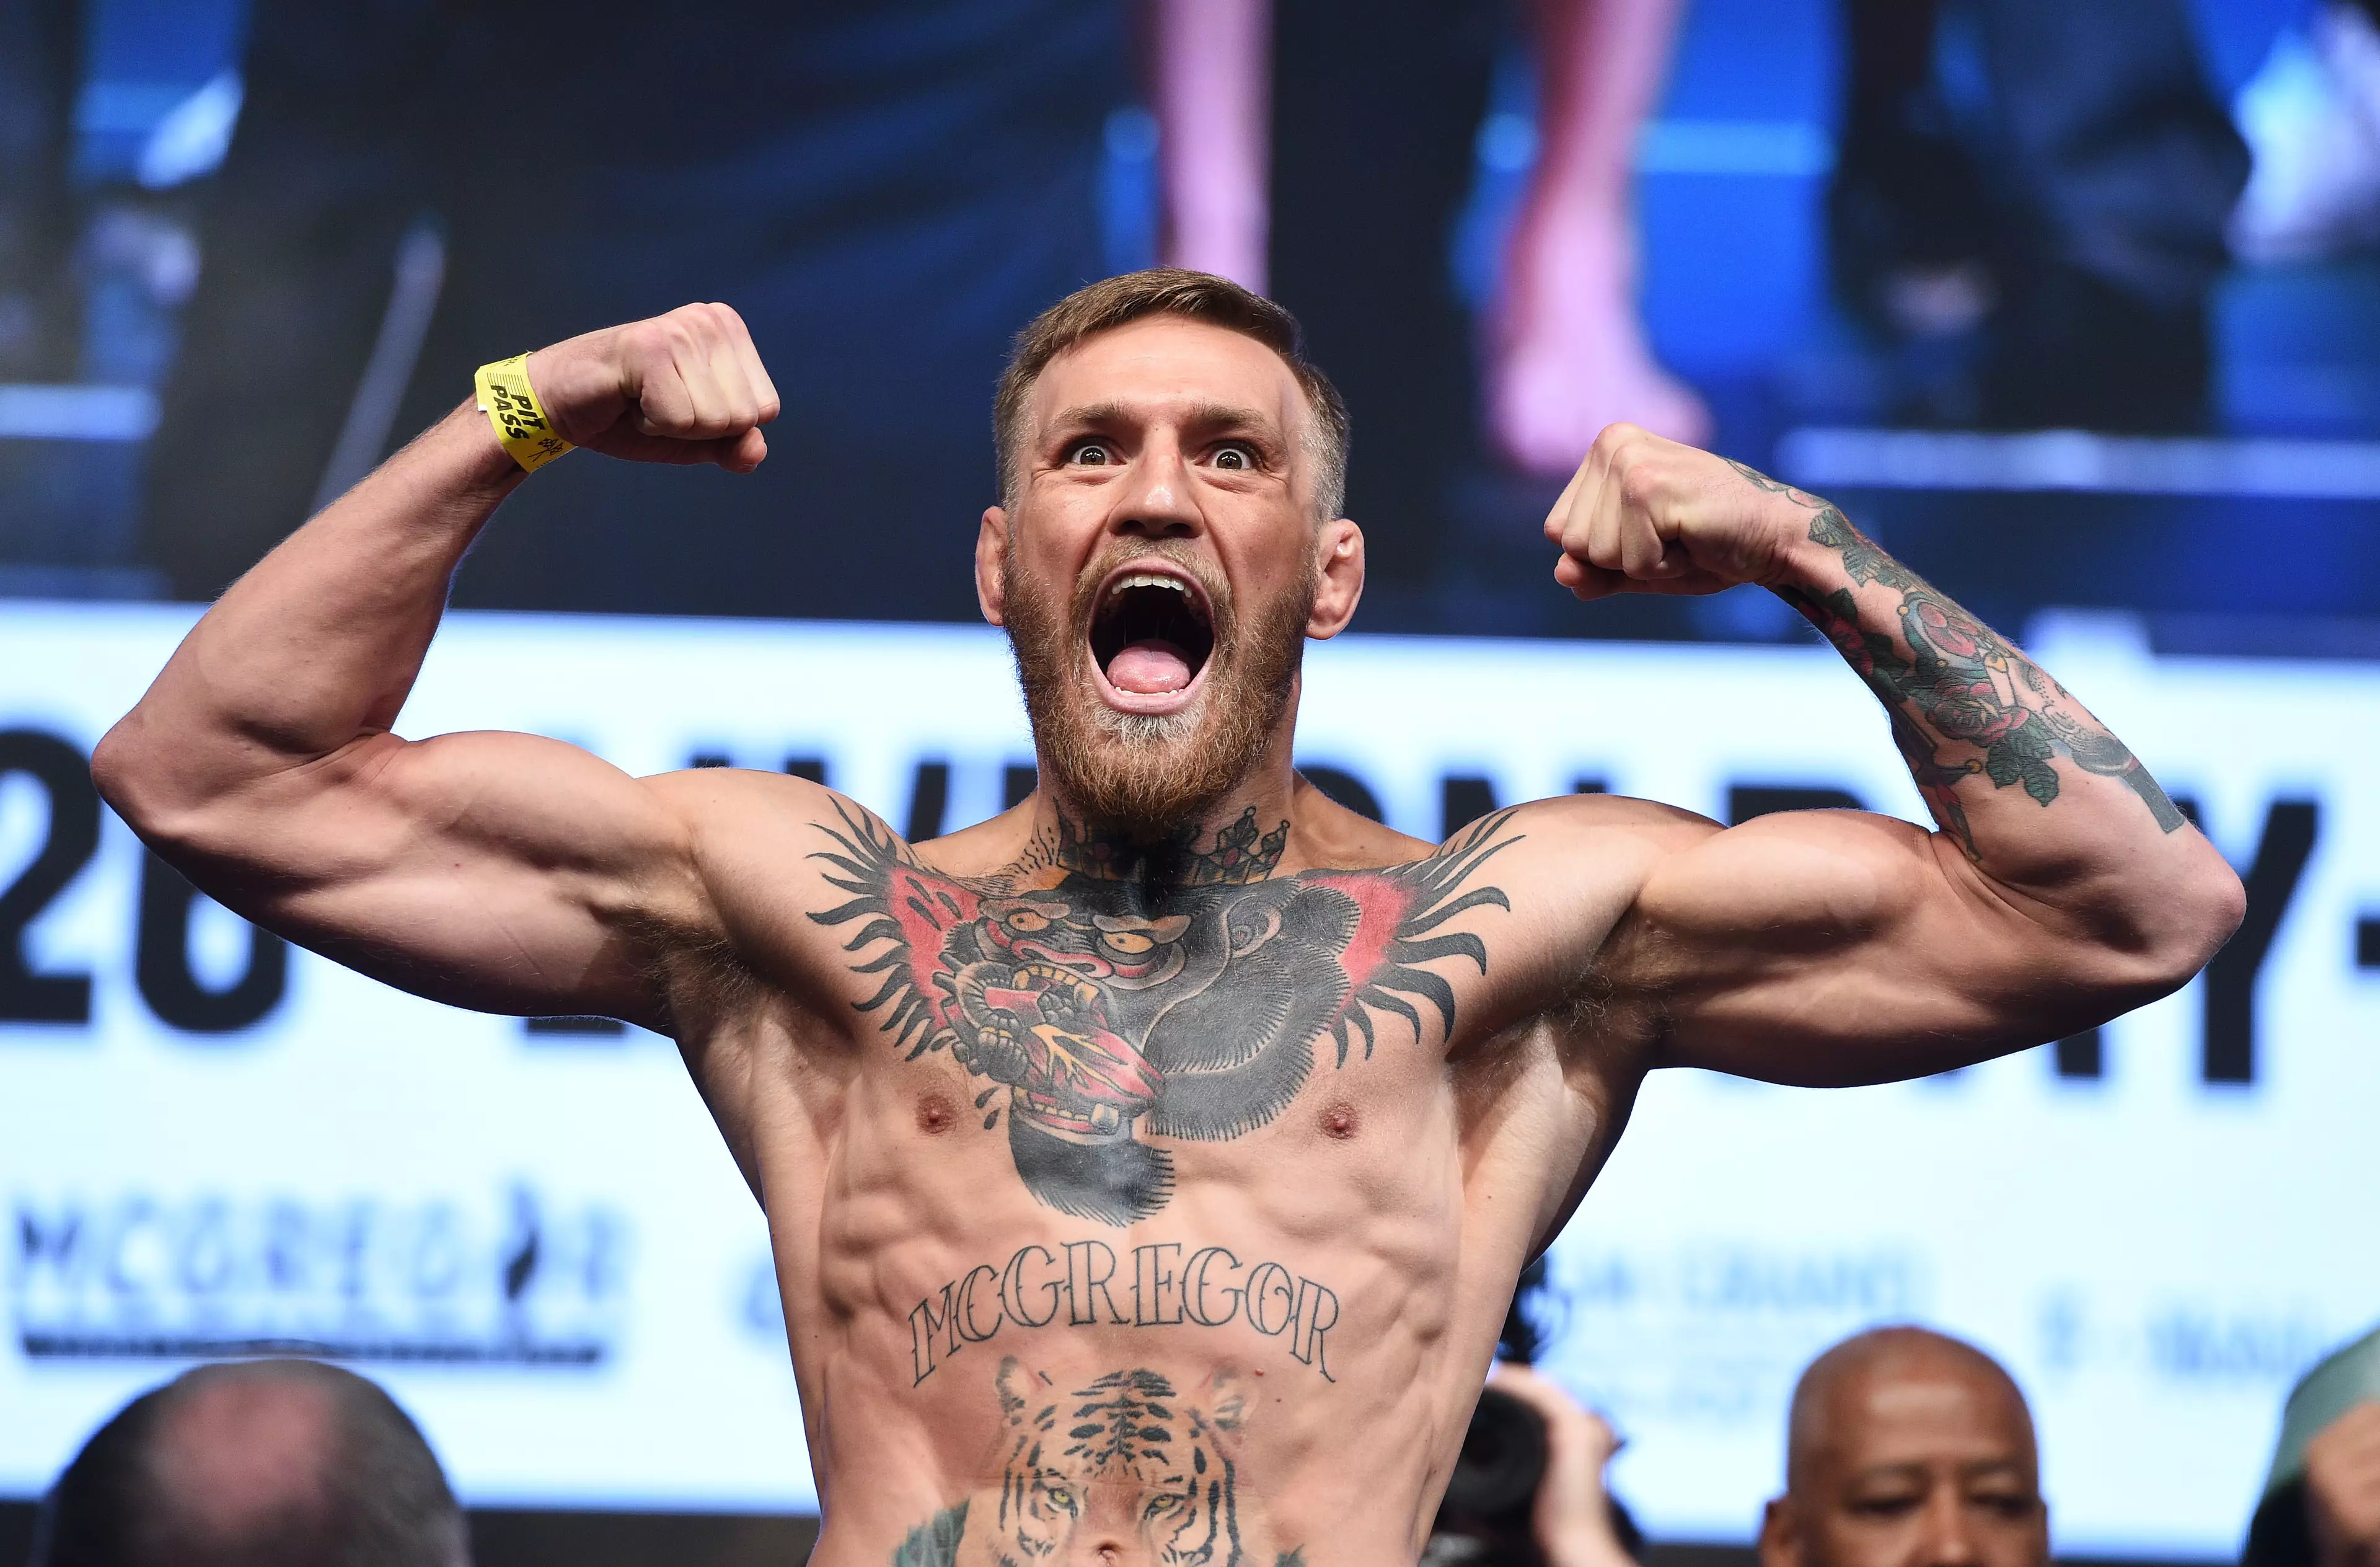 Conor McGregor will make his long-awaited UFC return this month